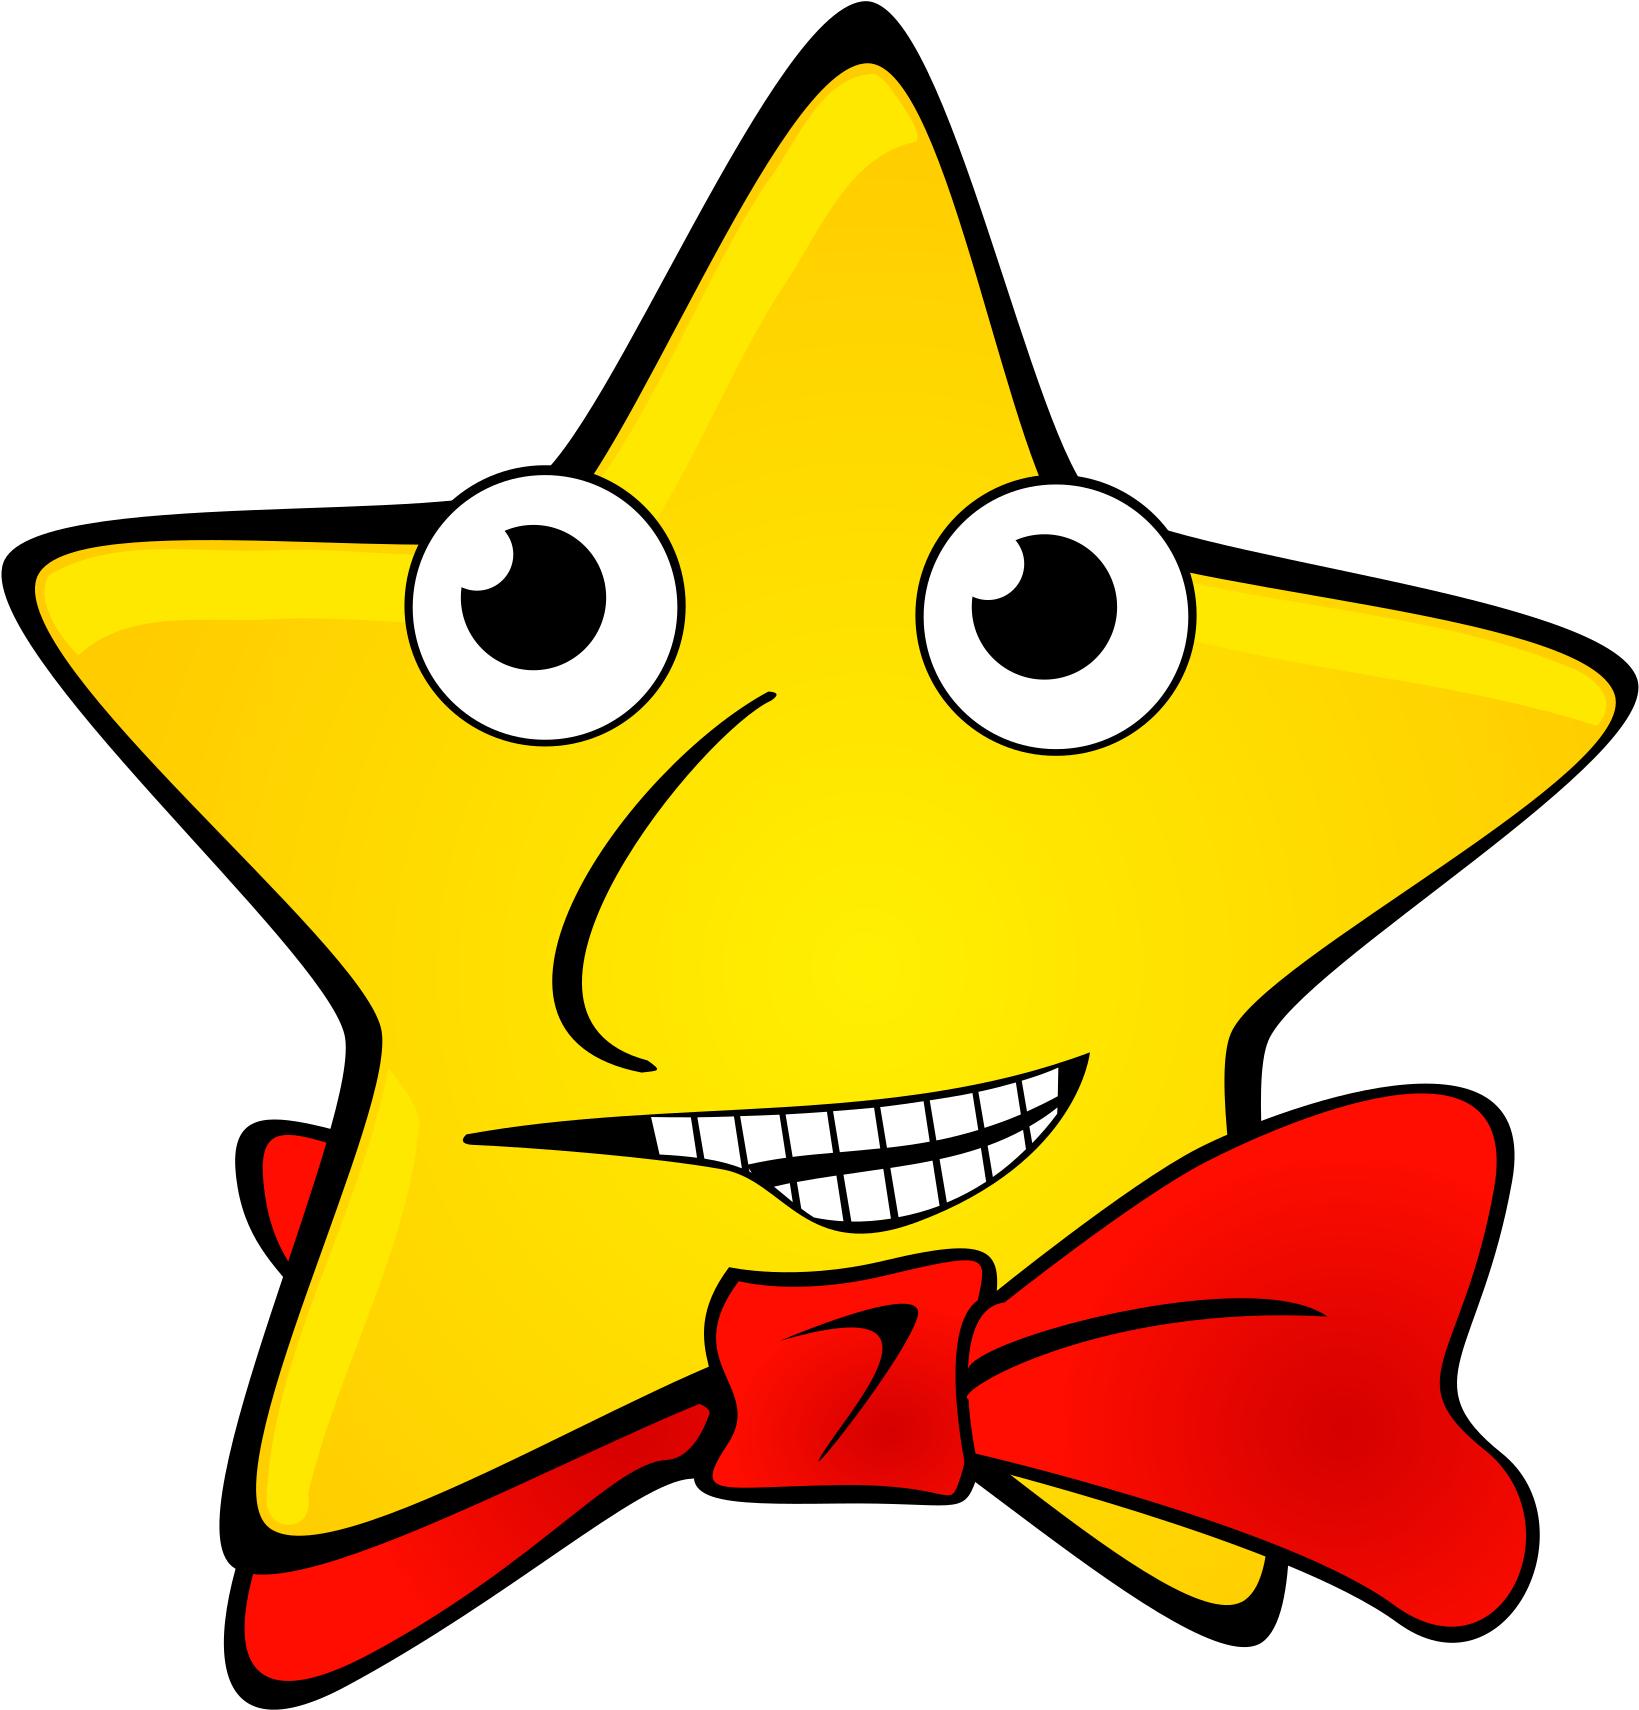 Big Image - Yellow Star With Red Bow 1 25 Magnet (2400x2400)